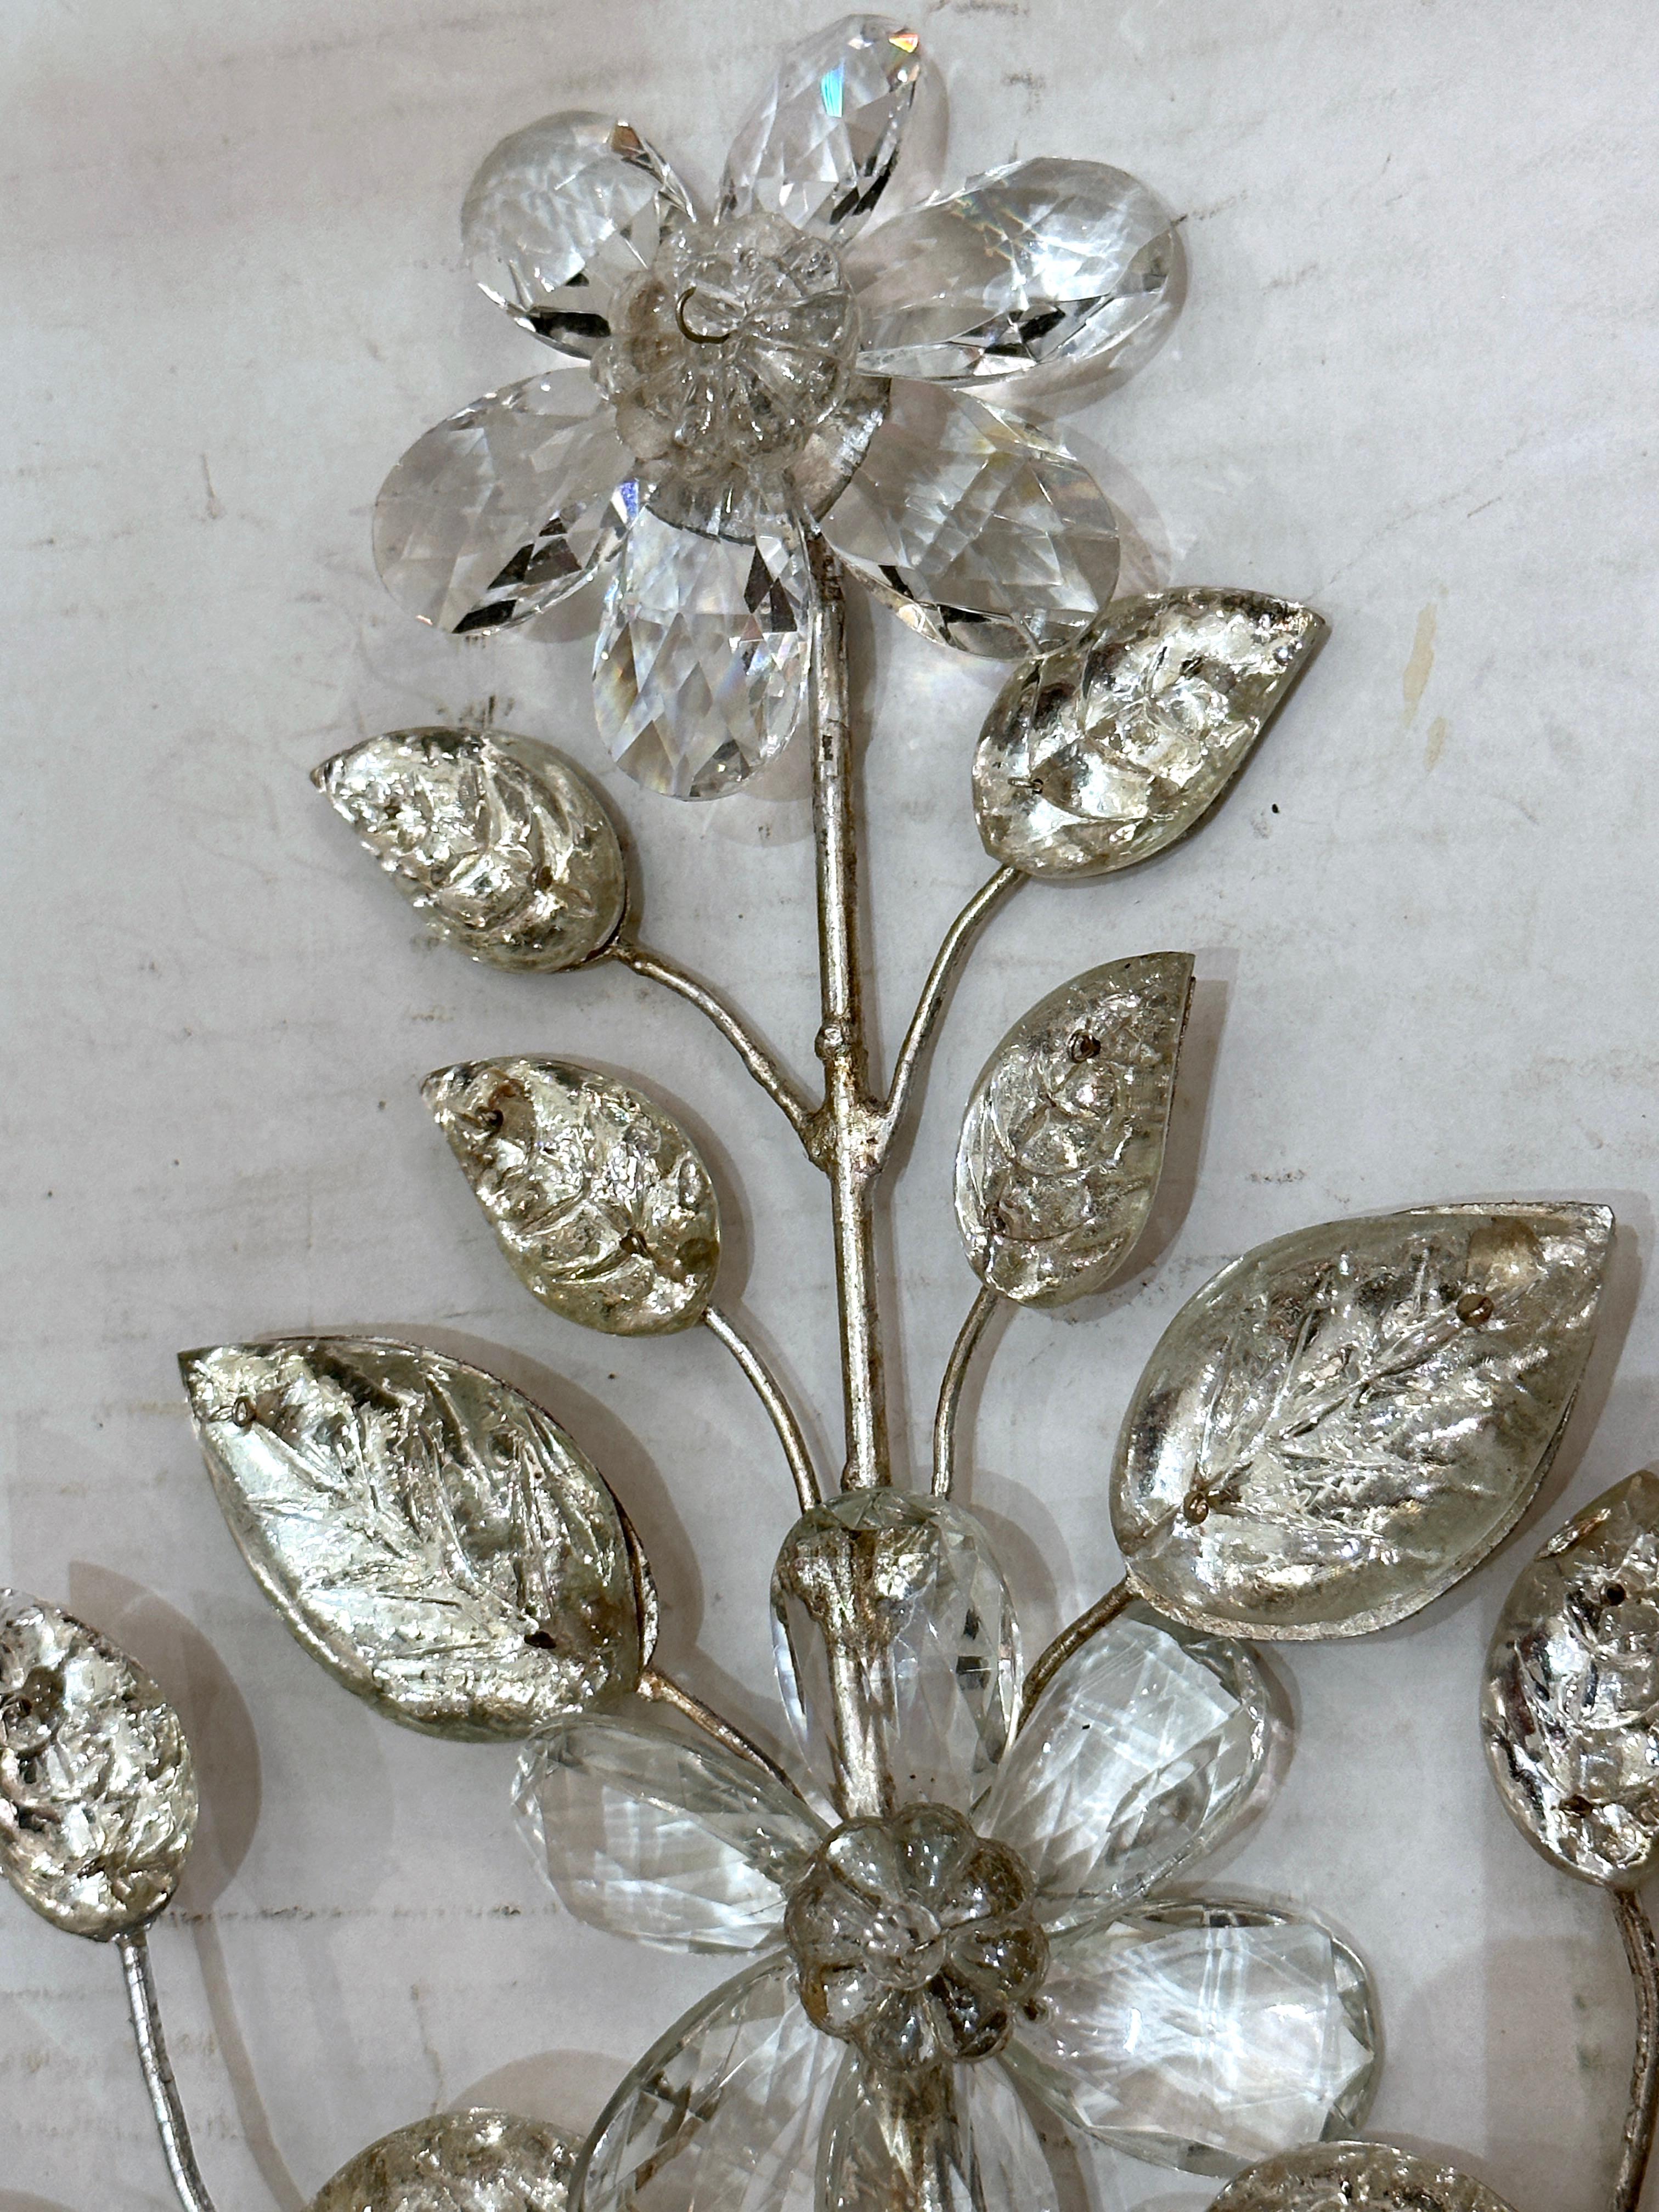 Set of 4 French 1930's silver plated sconces with molded glass leaves and crystal flowers. Sold per pair.
Measurements:
Height: 18